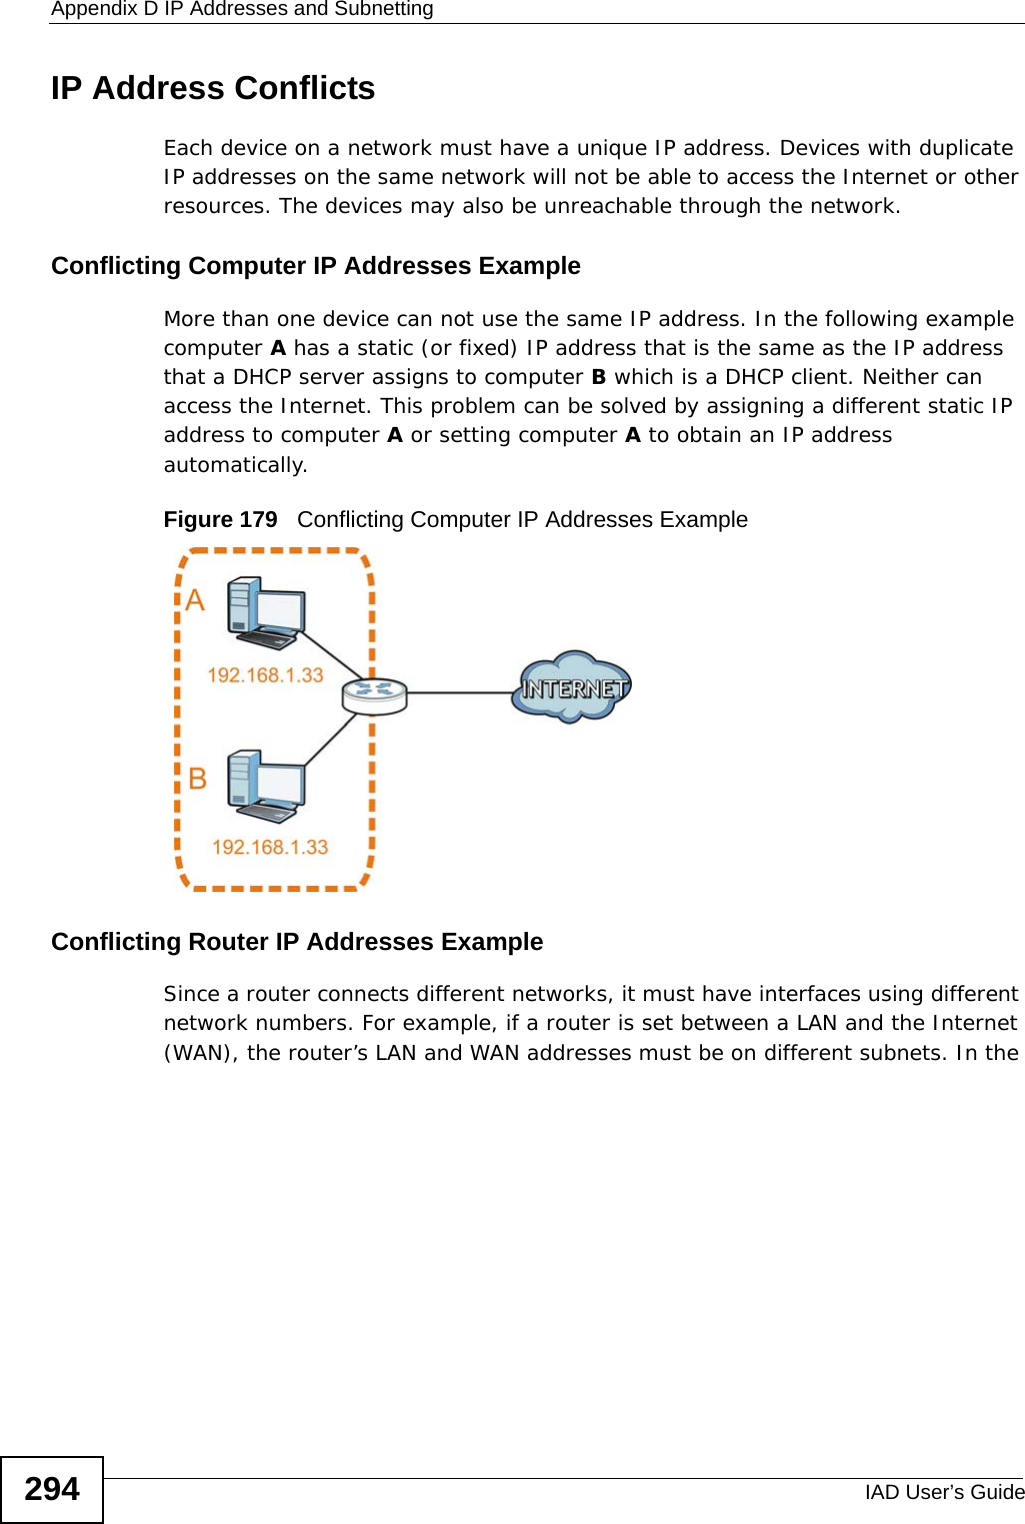 Appendix D IP Addresses and SubnettingIAD User’s Guide294IP Address ConflictsEach device on a network must have a unique IP address. Devices with duplicate IP addresses on the same network will not be able to access the Internet or other resources. The devices may also be unreachable through the network. Conflicting Computer IP Addresses ExampleMore than one device can not use the same IP address. In the following example computer A has a static (or fixed) IP address that is the same as the IP address that a DHCP server assigns to computer B which is a DHCP client. Neither can access the Internet. This problem can be solved by assigning a different static IP address to computer A or setting computer A to obtain an IP address automatically.  Figure 179   Conflicting Computer IP Addresses ExampleConflicting Router IP Addresses ExampleSince a router connects different networks, it must have interfaces using different network numbers. For example, if a router is set between a LAN and the Internet (WAN), the router’s LAN and WAN addresses must be on different subnets. In the 